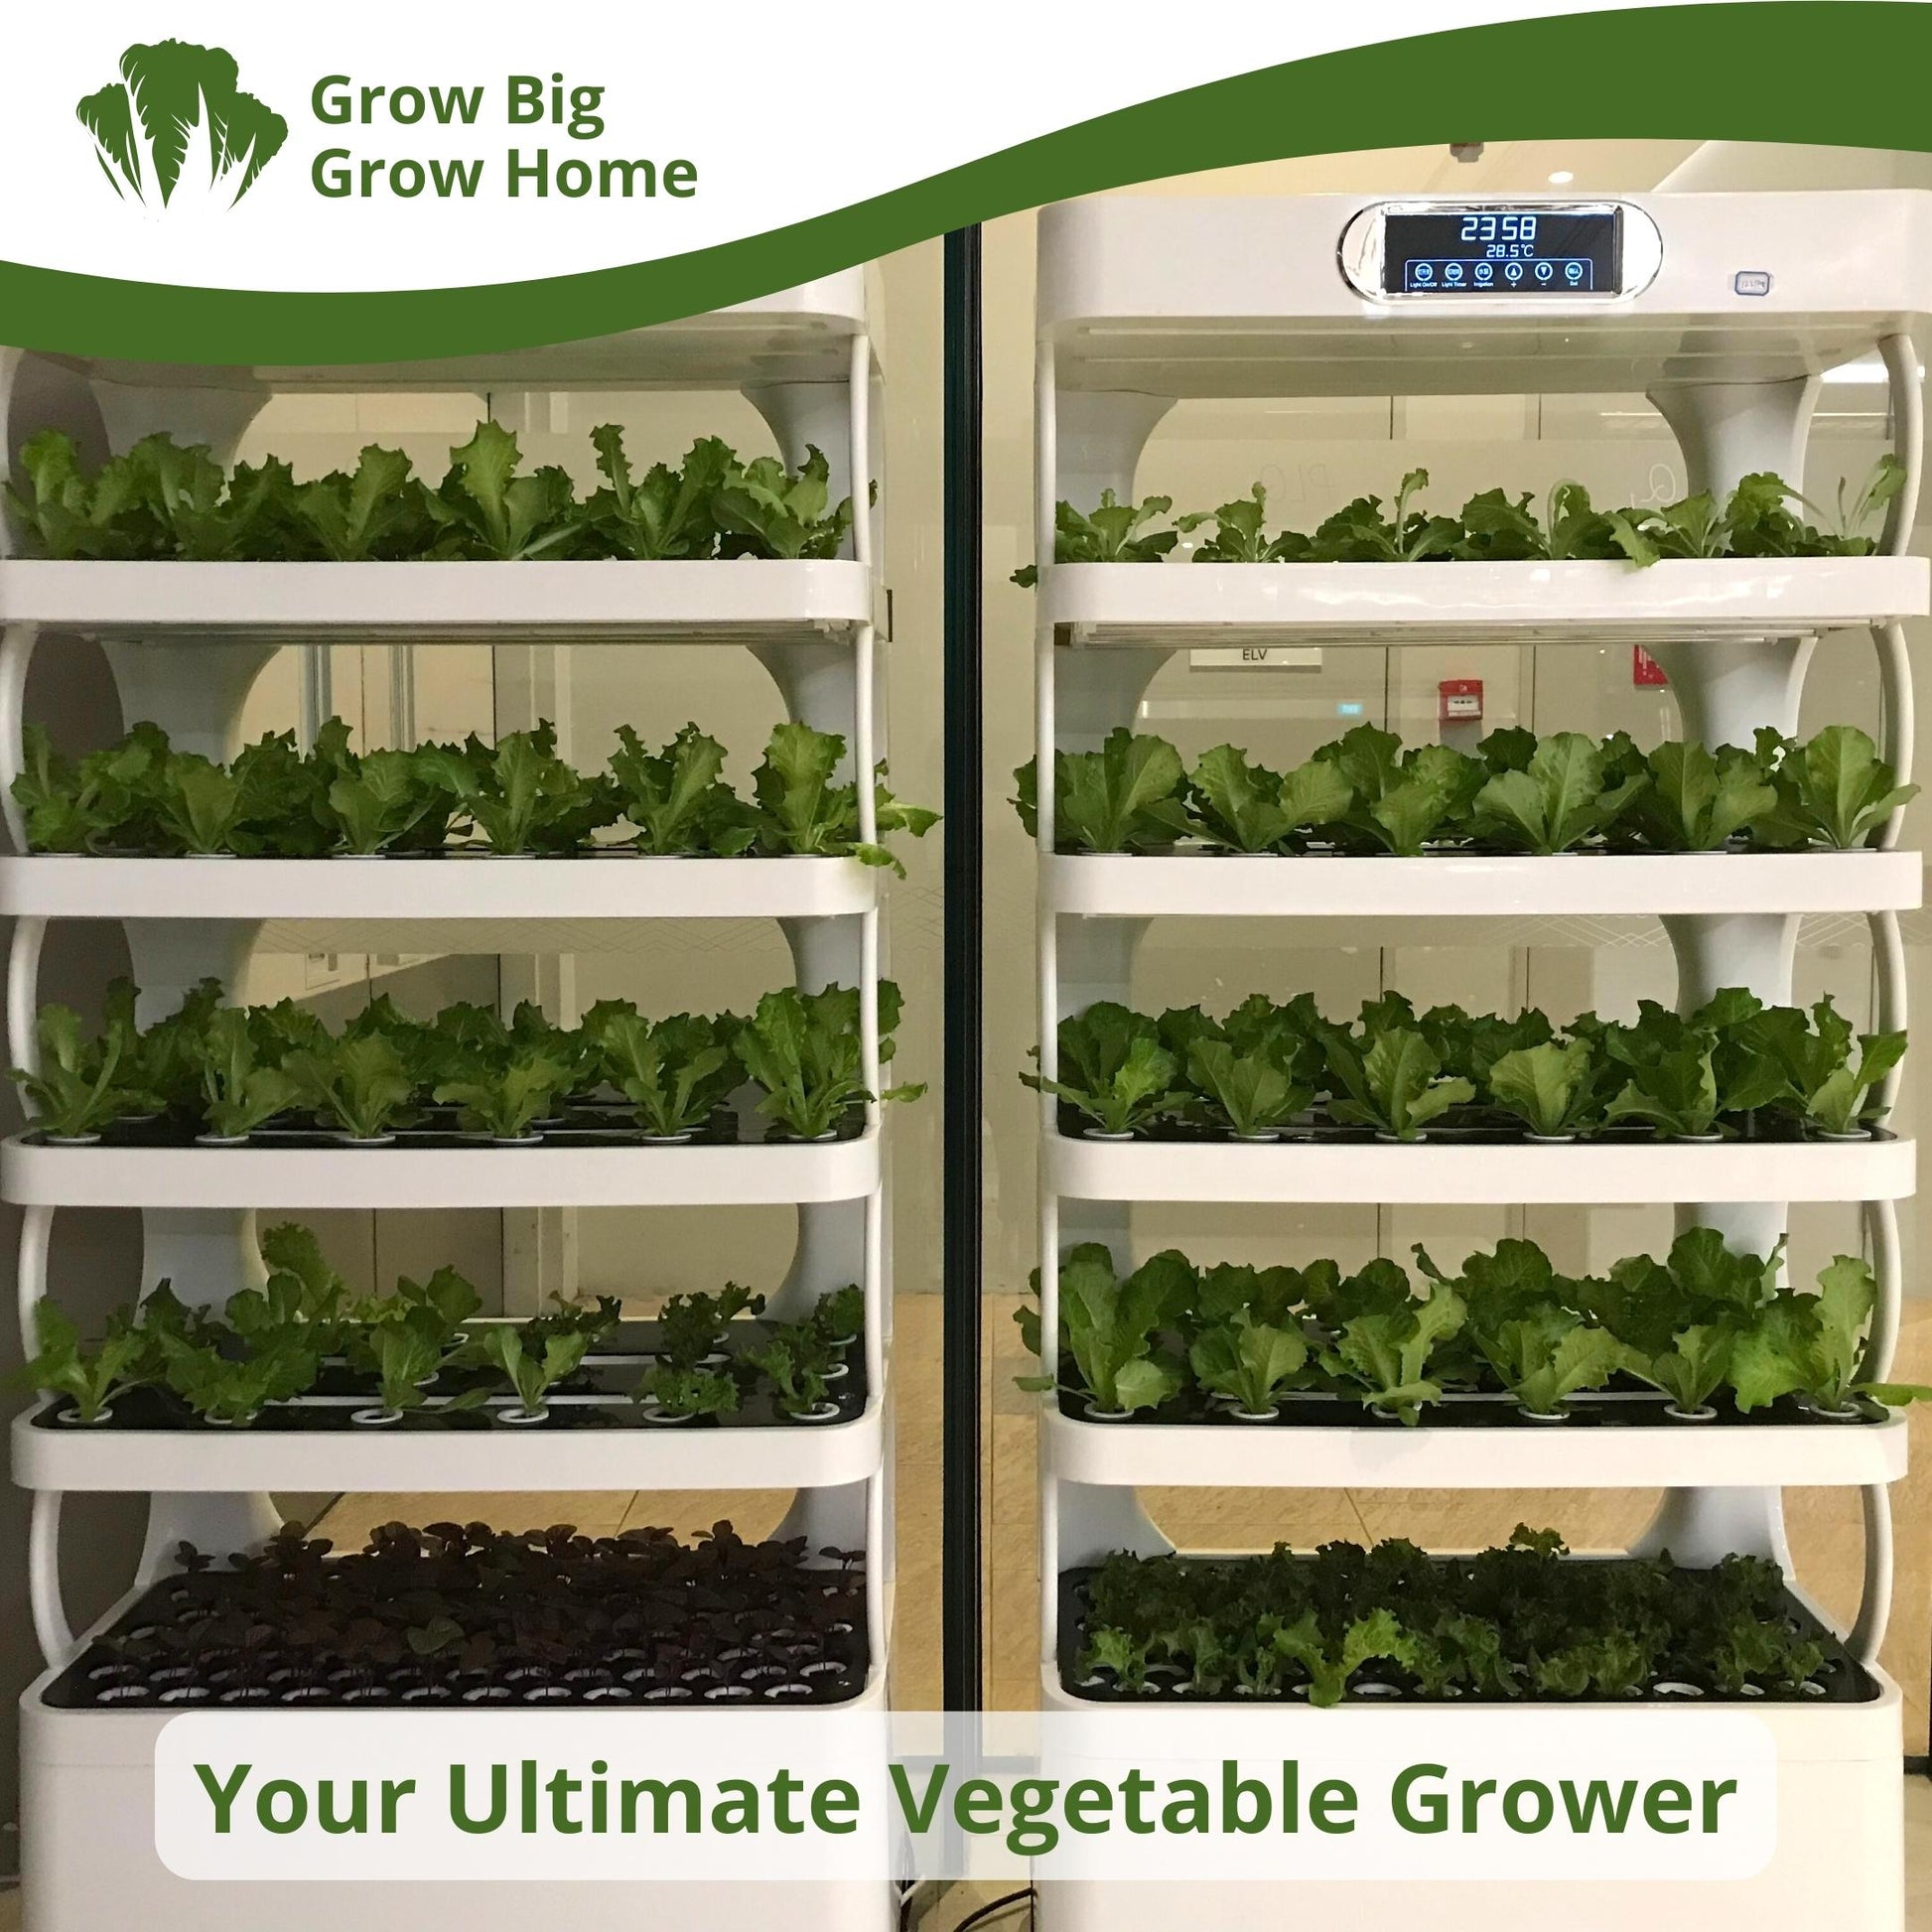 Grow System 157 is the ultimate, most productive, highest yielding in-house vegetable grower